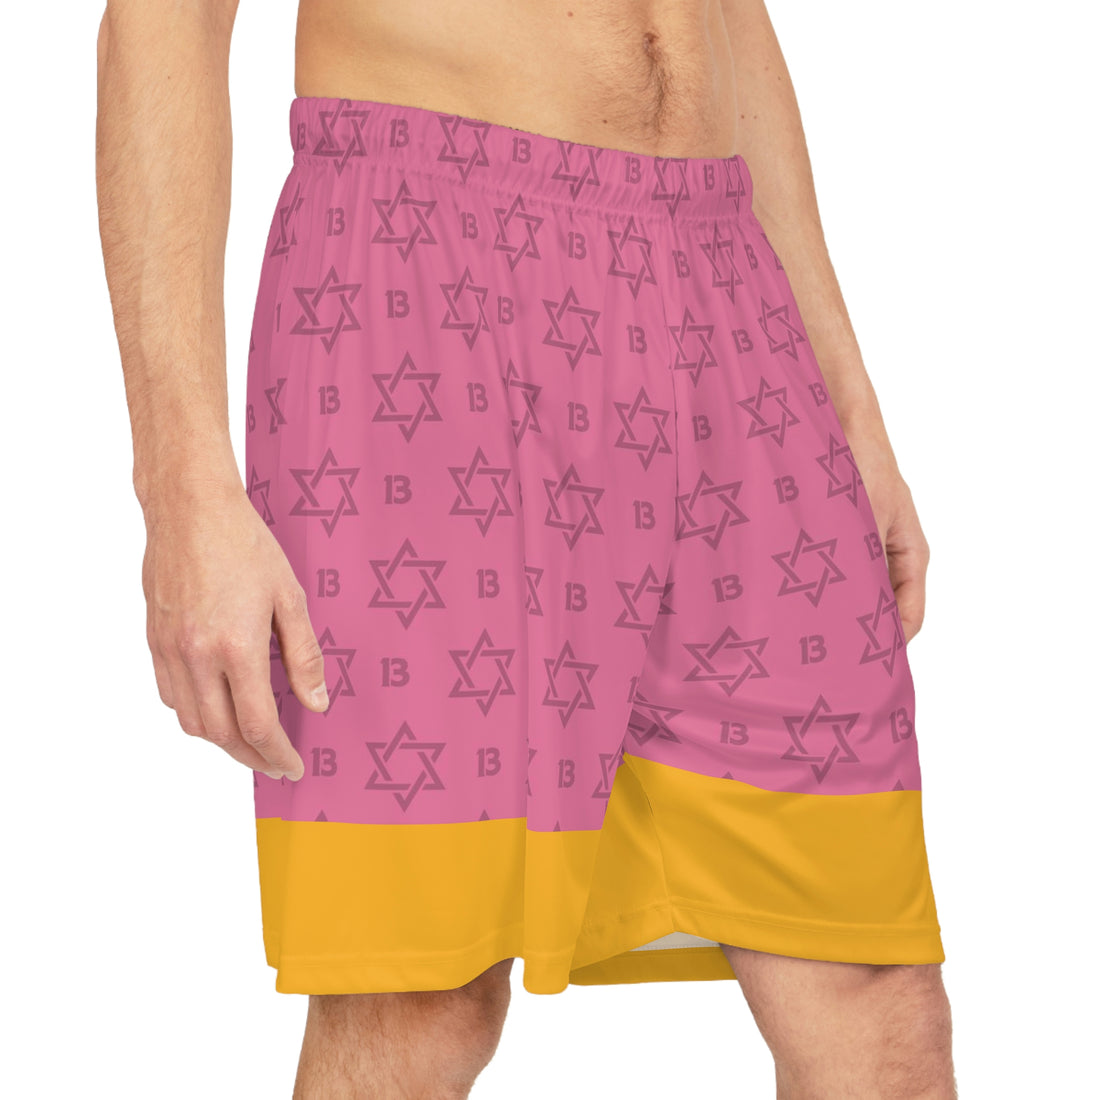 Father Yod's Team Pink Shorts